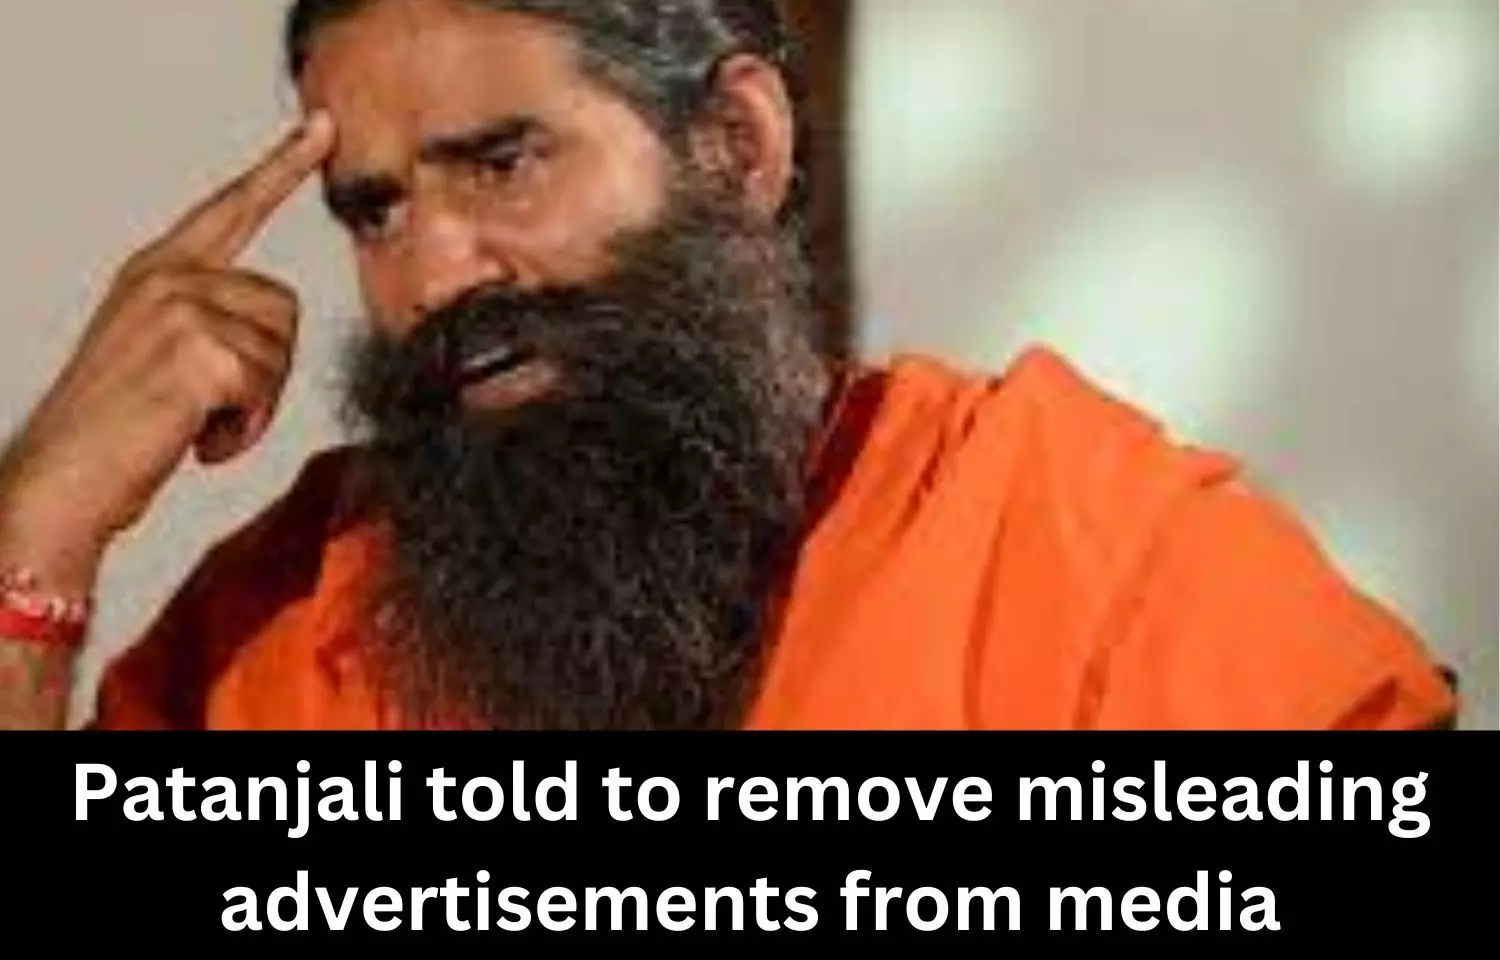 Patanjali asked to remove misleading advertisements on Ayurvedic products